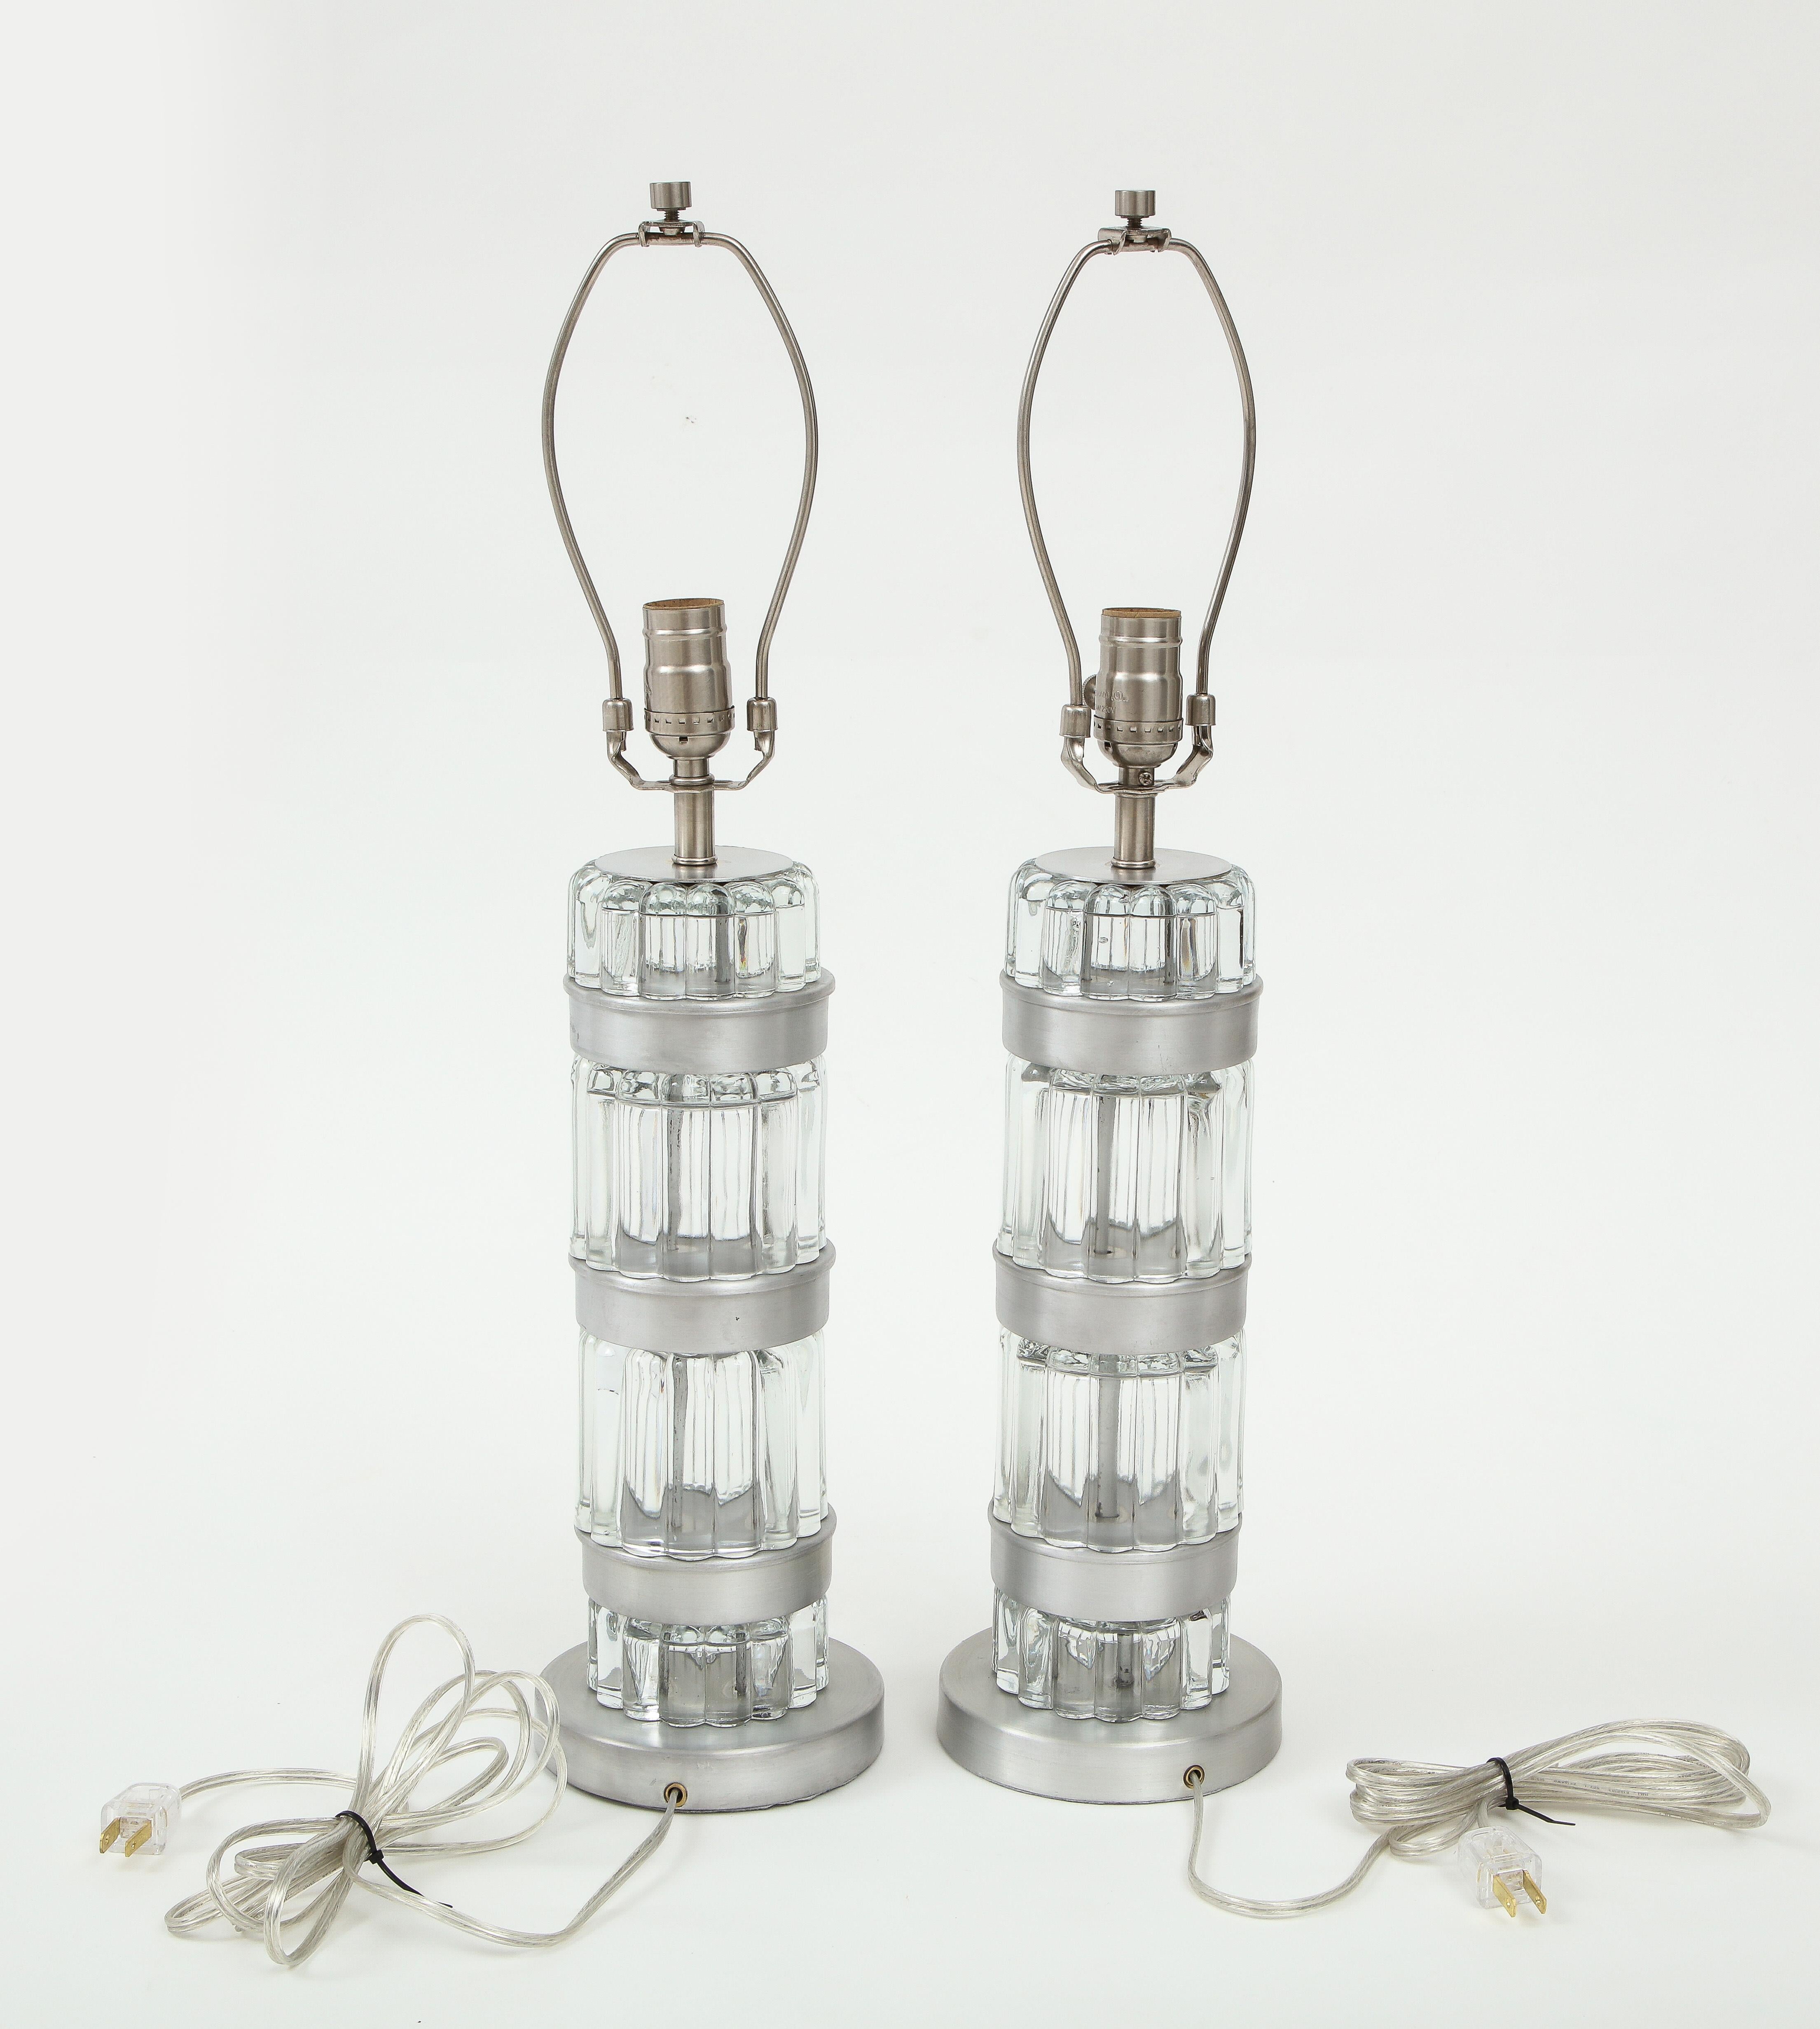 Donald Deskey Machine Age lamps featuring heavy fluted glass elements and spun aluminum discs. Rewired for use in the USA with nickel hardware.

Available at 200 Lexington Ave, 10th floor.